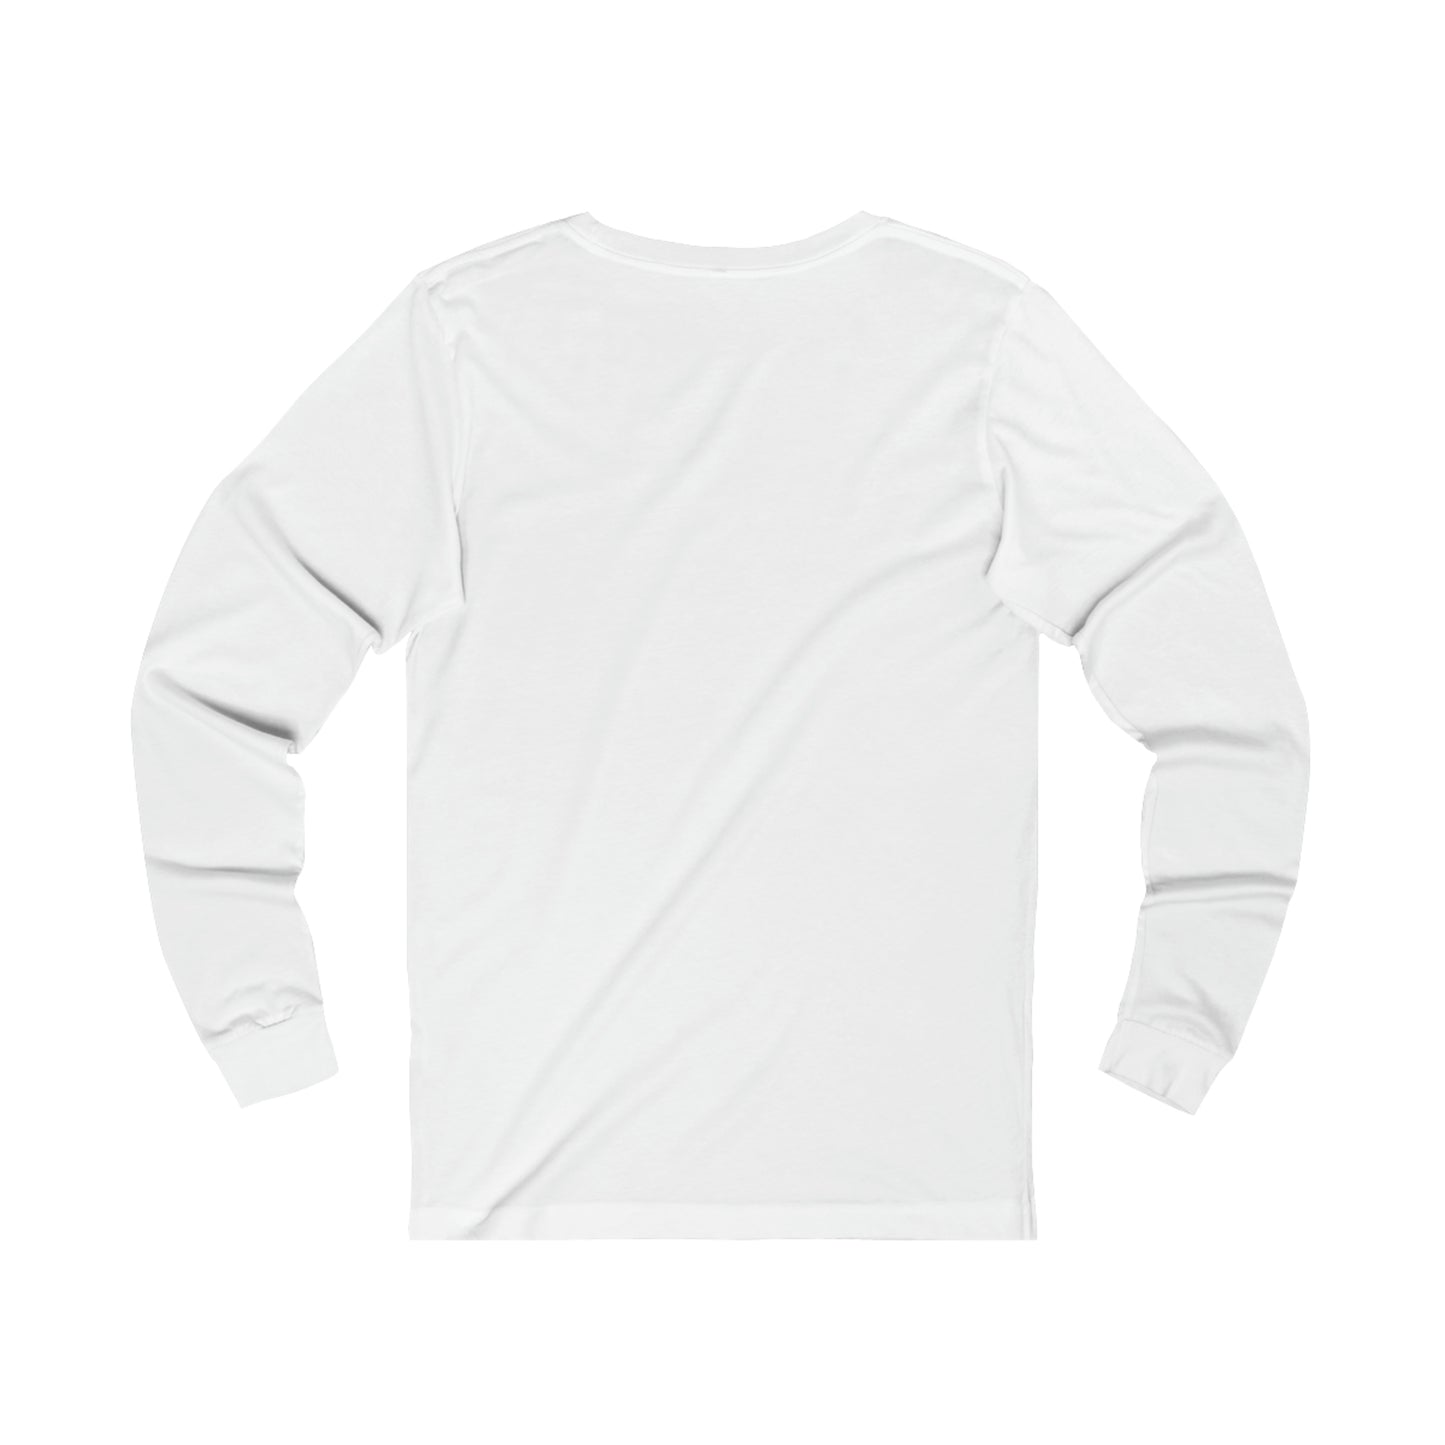 Unisex Long Sleeve Graphic Template